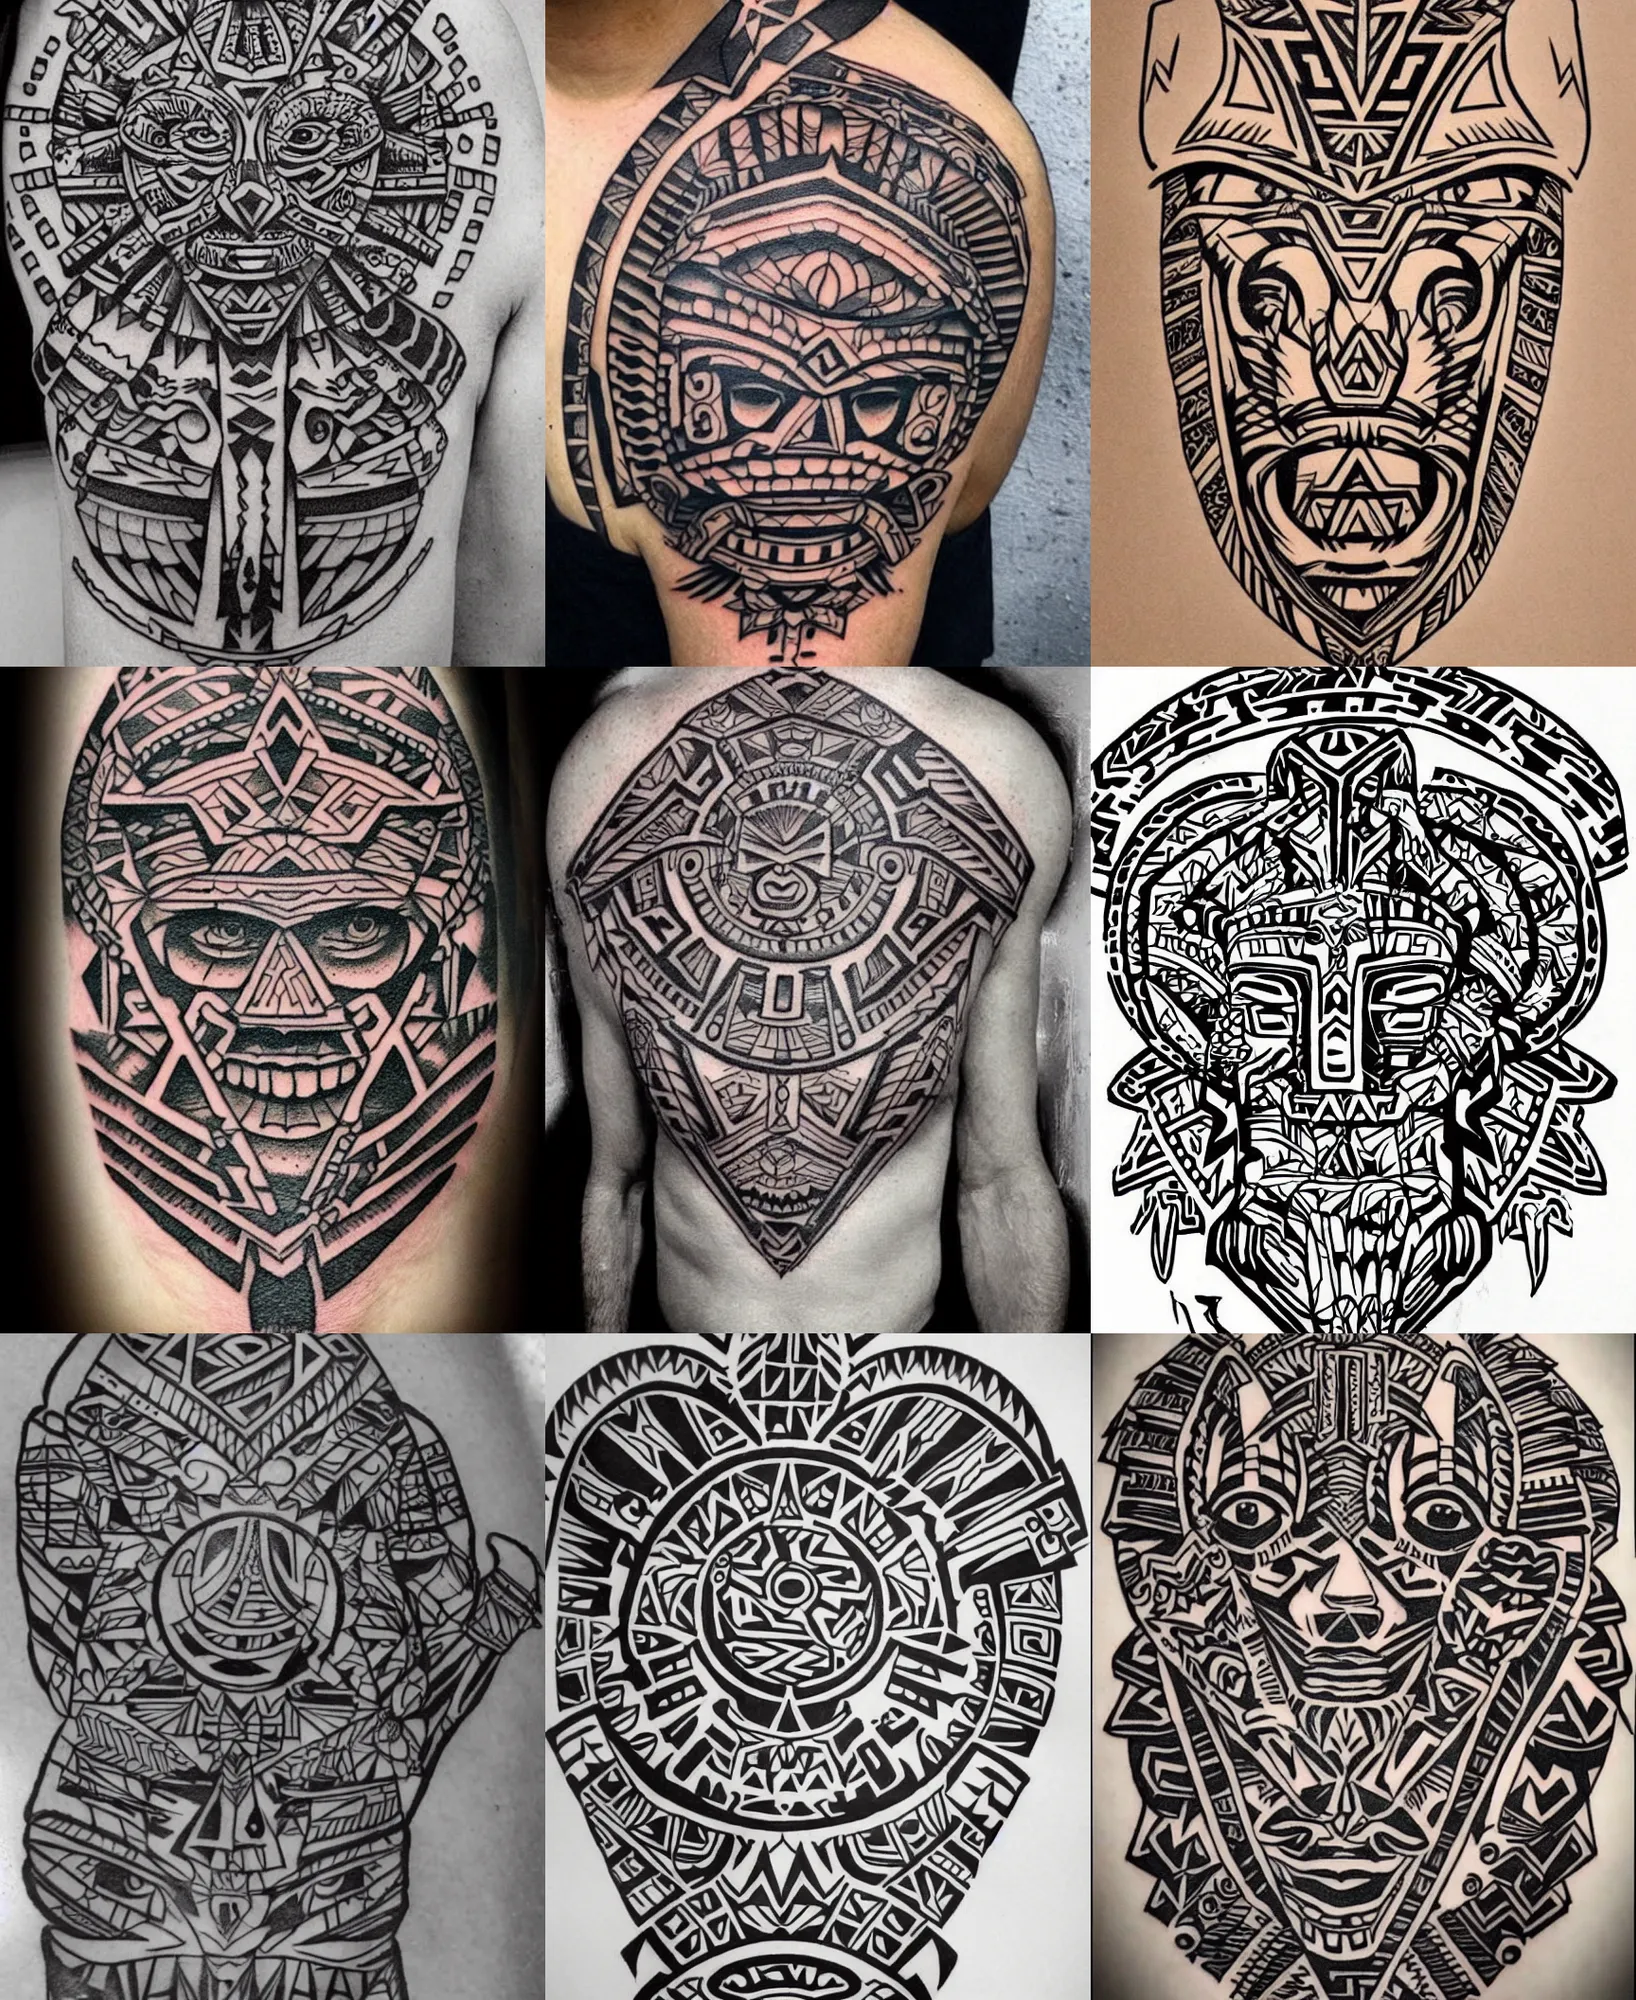 101+ Aztec Tattoo Ideas You'll Have To See To Believe!